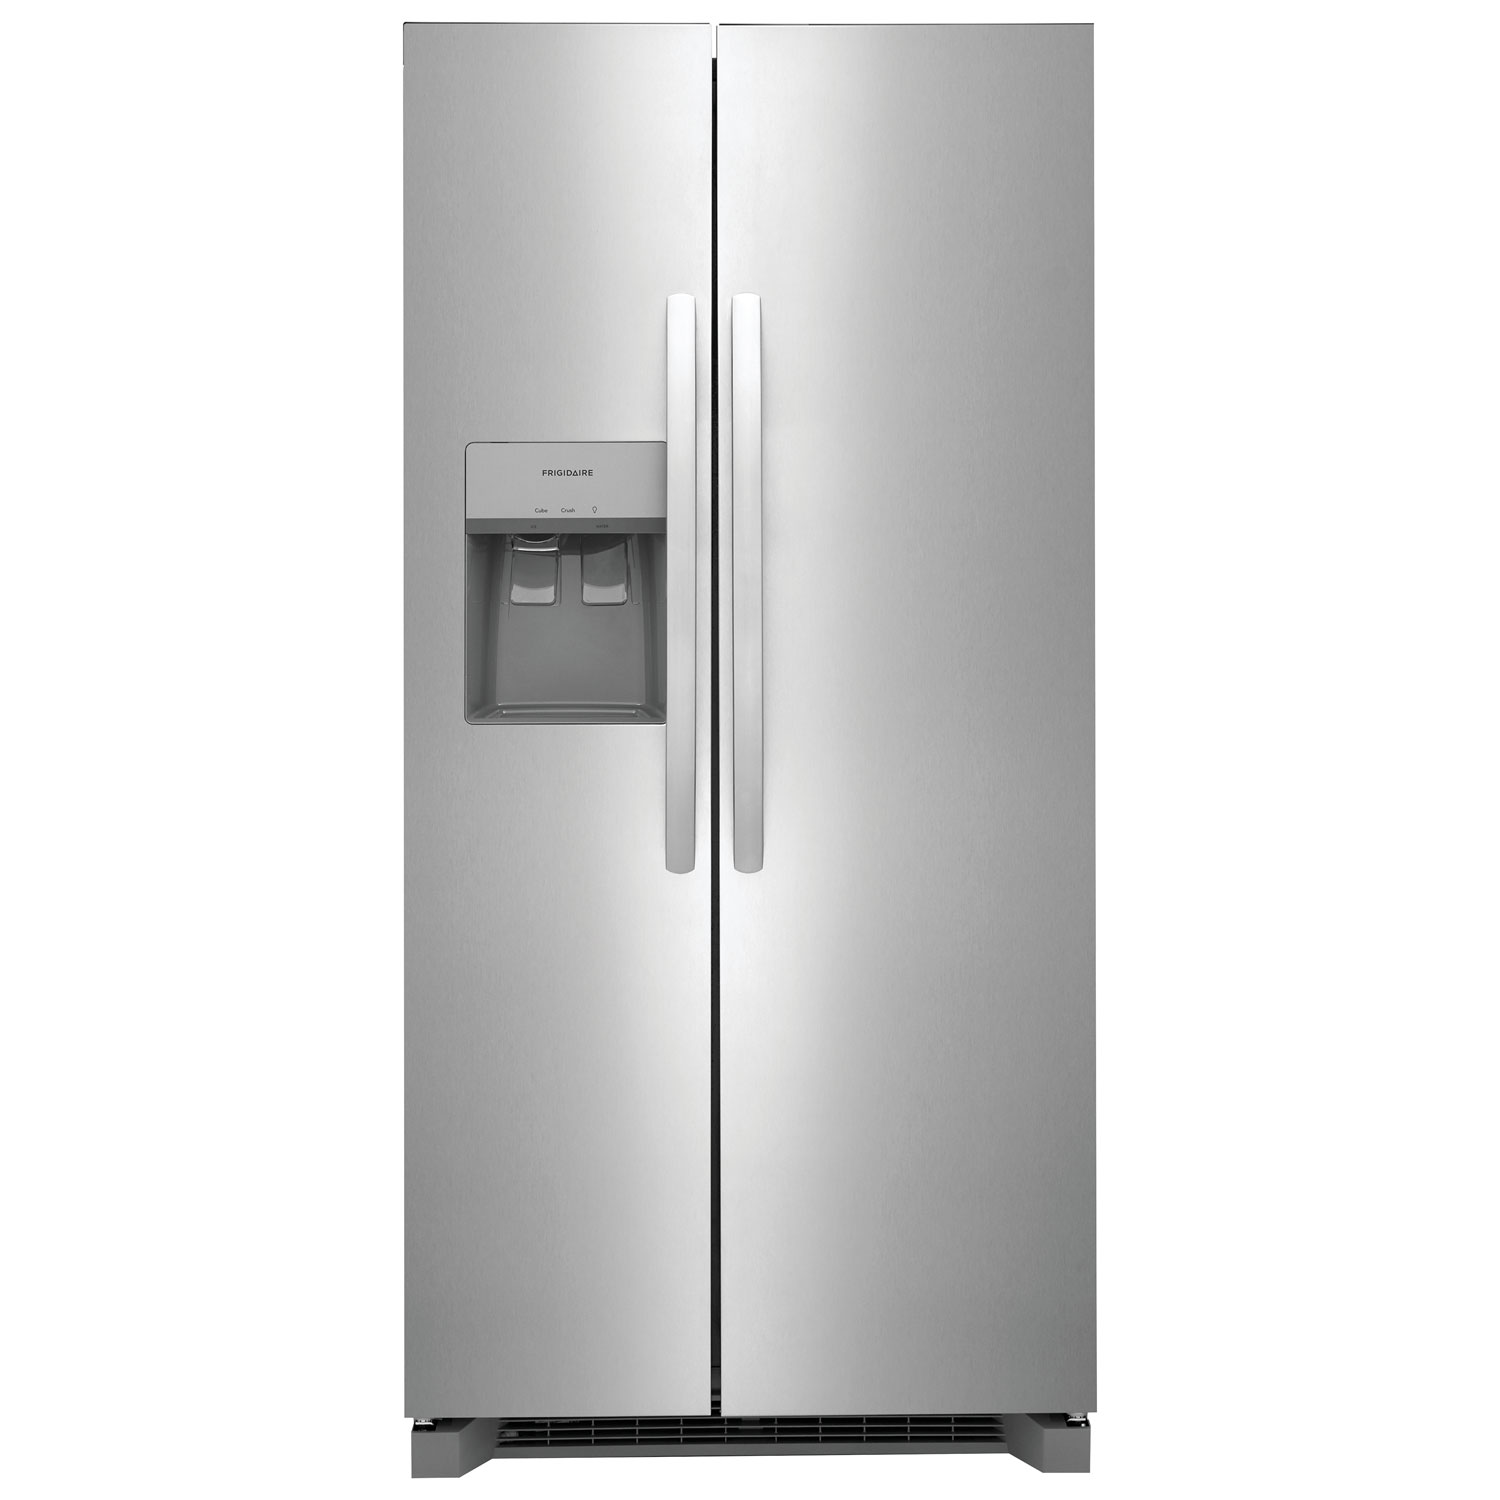 Frigidaire 33" 22.3 Cu. Ft. Side-By-Side Refrigerator with Ice & Water Dispenser (FRSS2323AS) - Stainless Steel